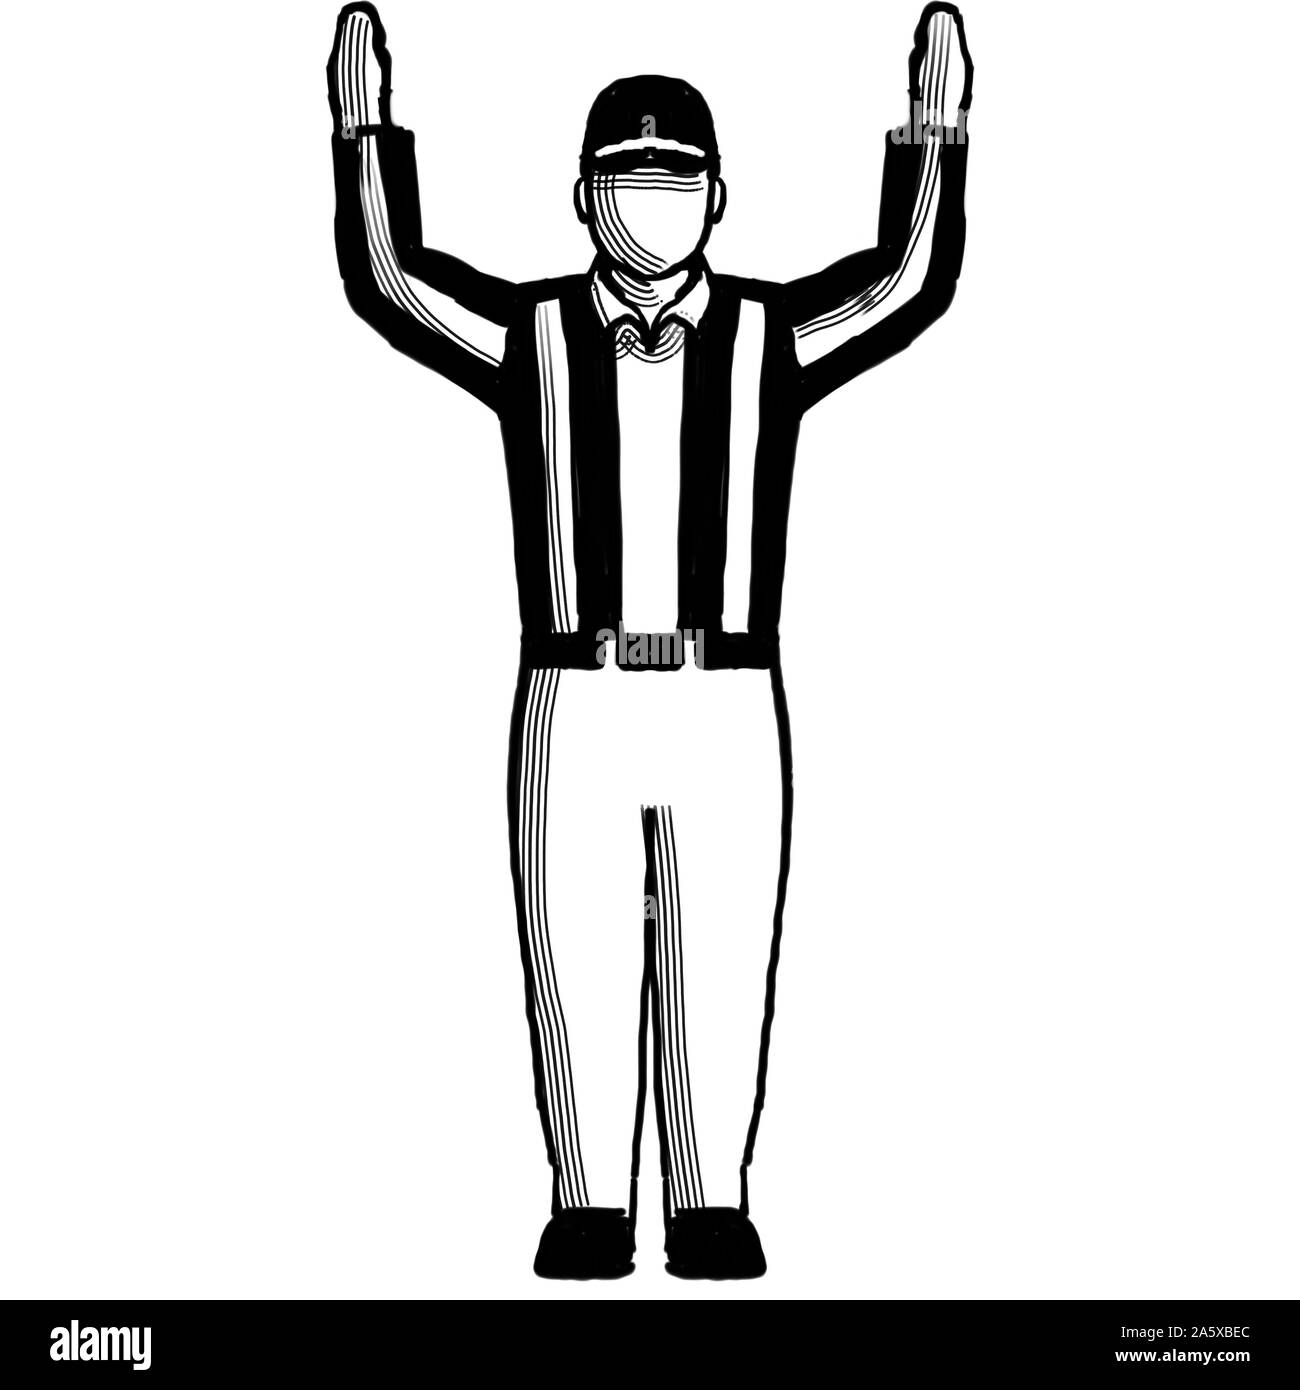 Retro style illustration of an American football referee or official with hand signal showing touchdown sign on isolated background done in black and Stock Photo